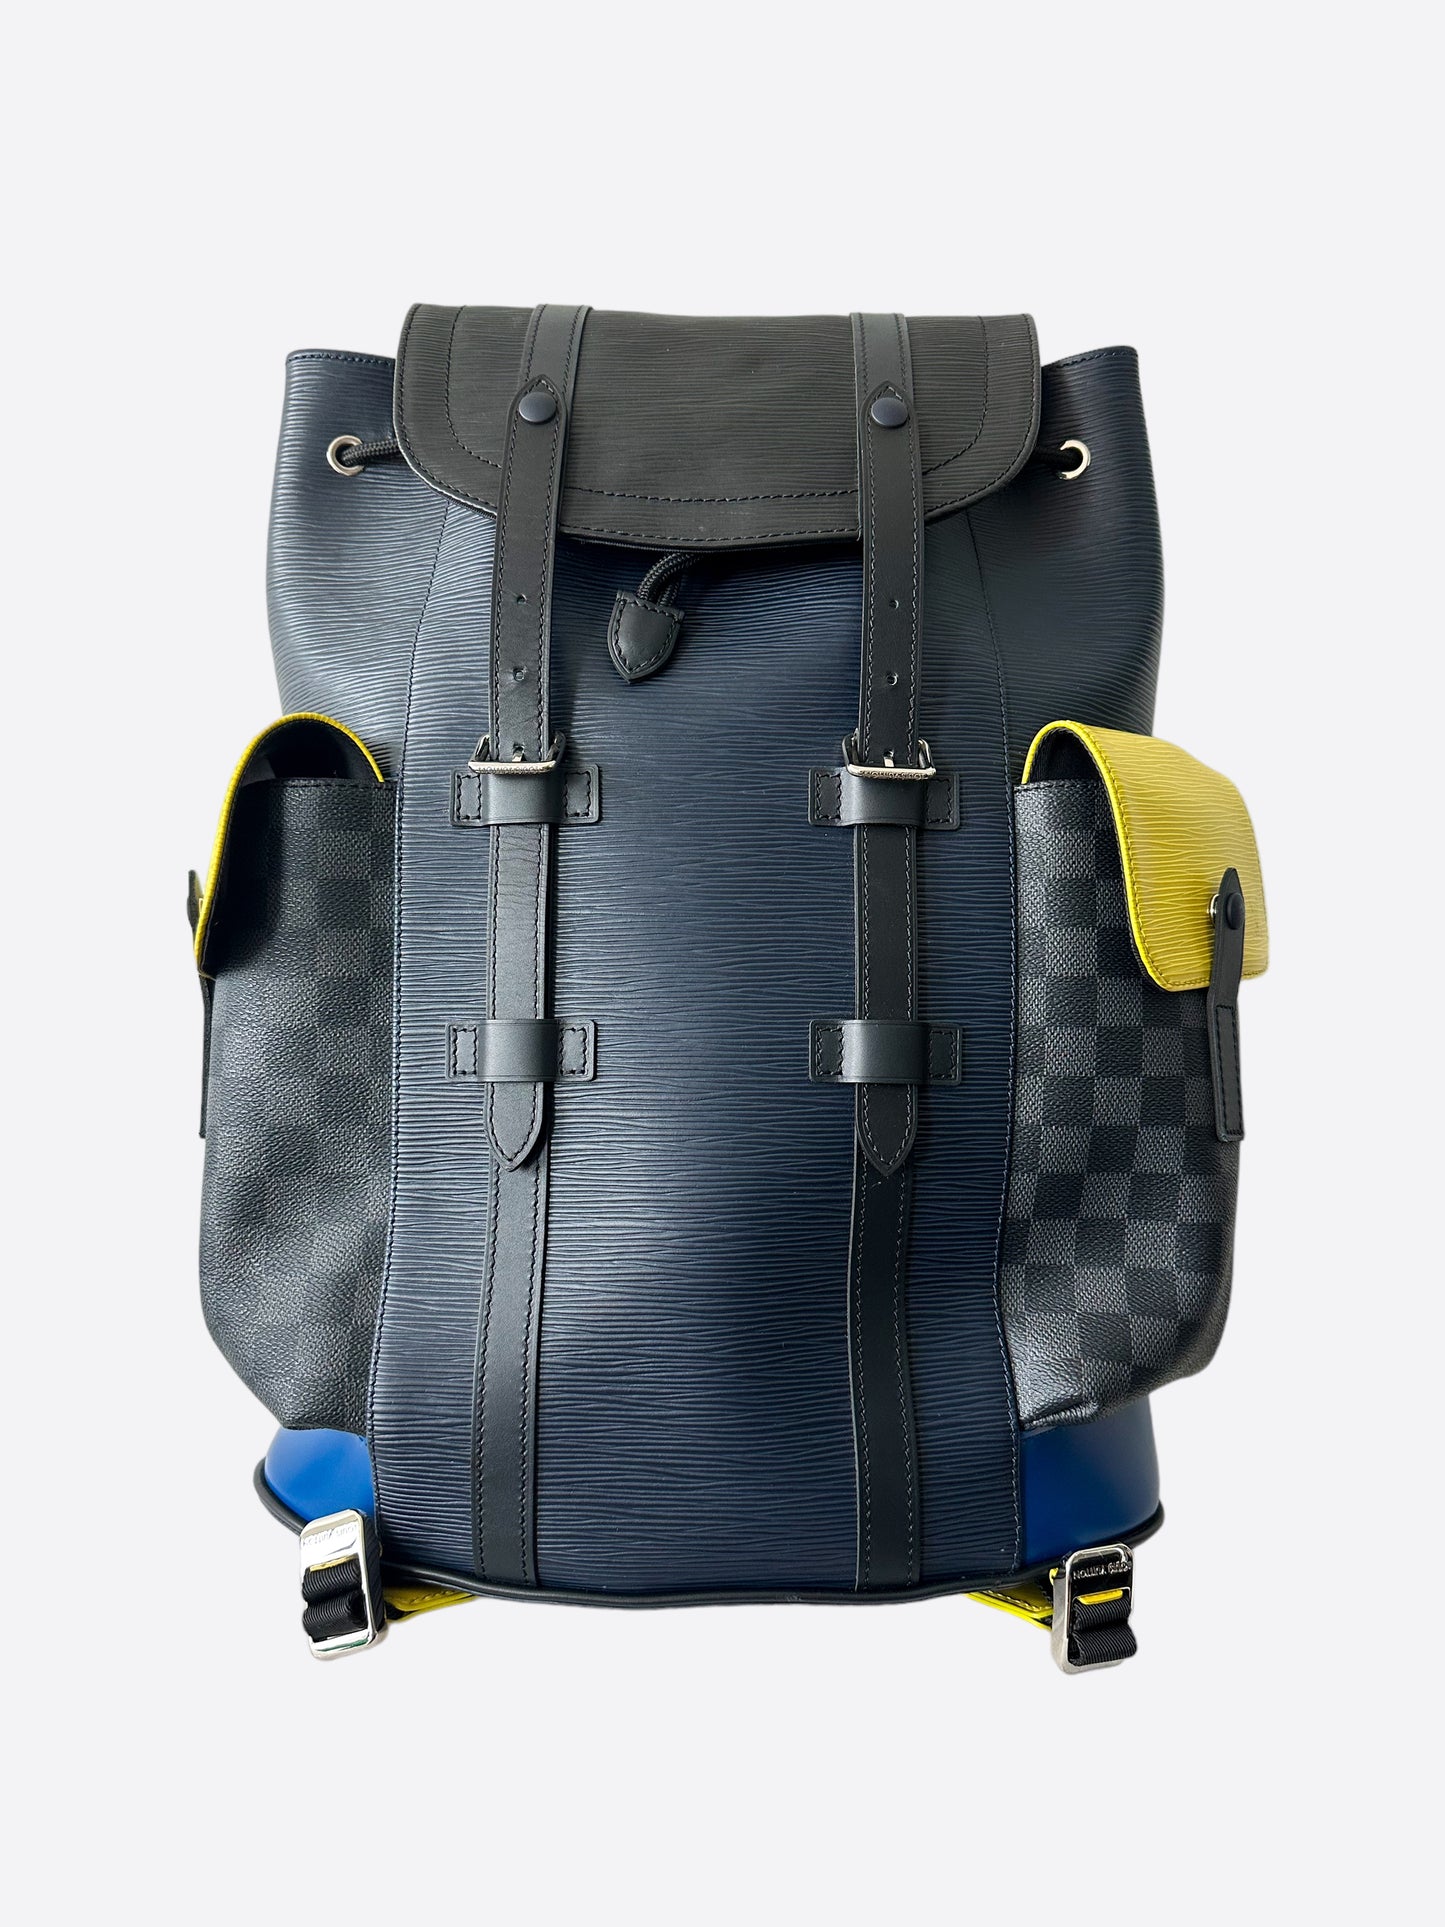 Louis Vuitton Damier Graphite Christopher Backpack